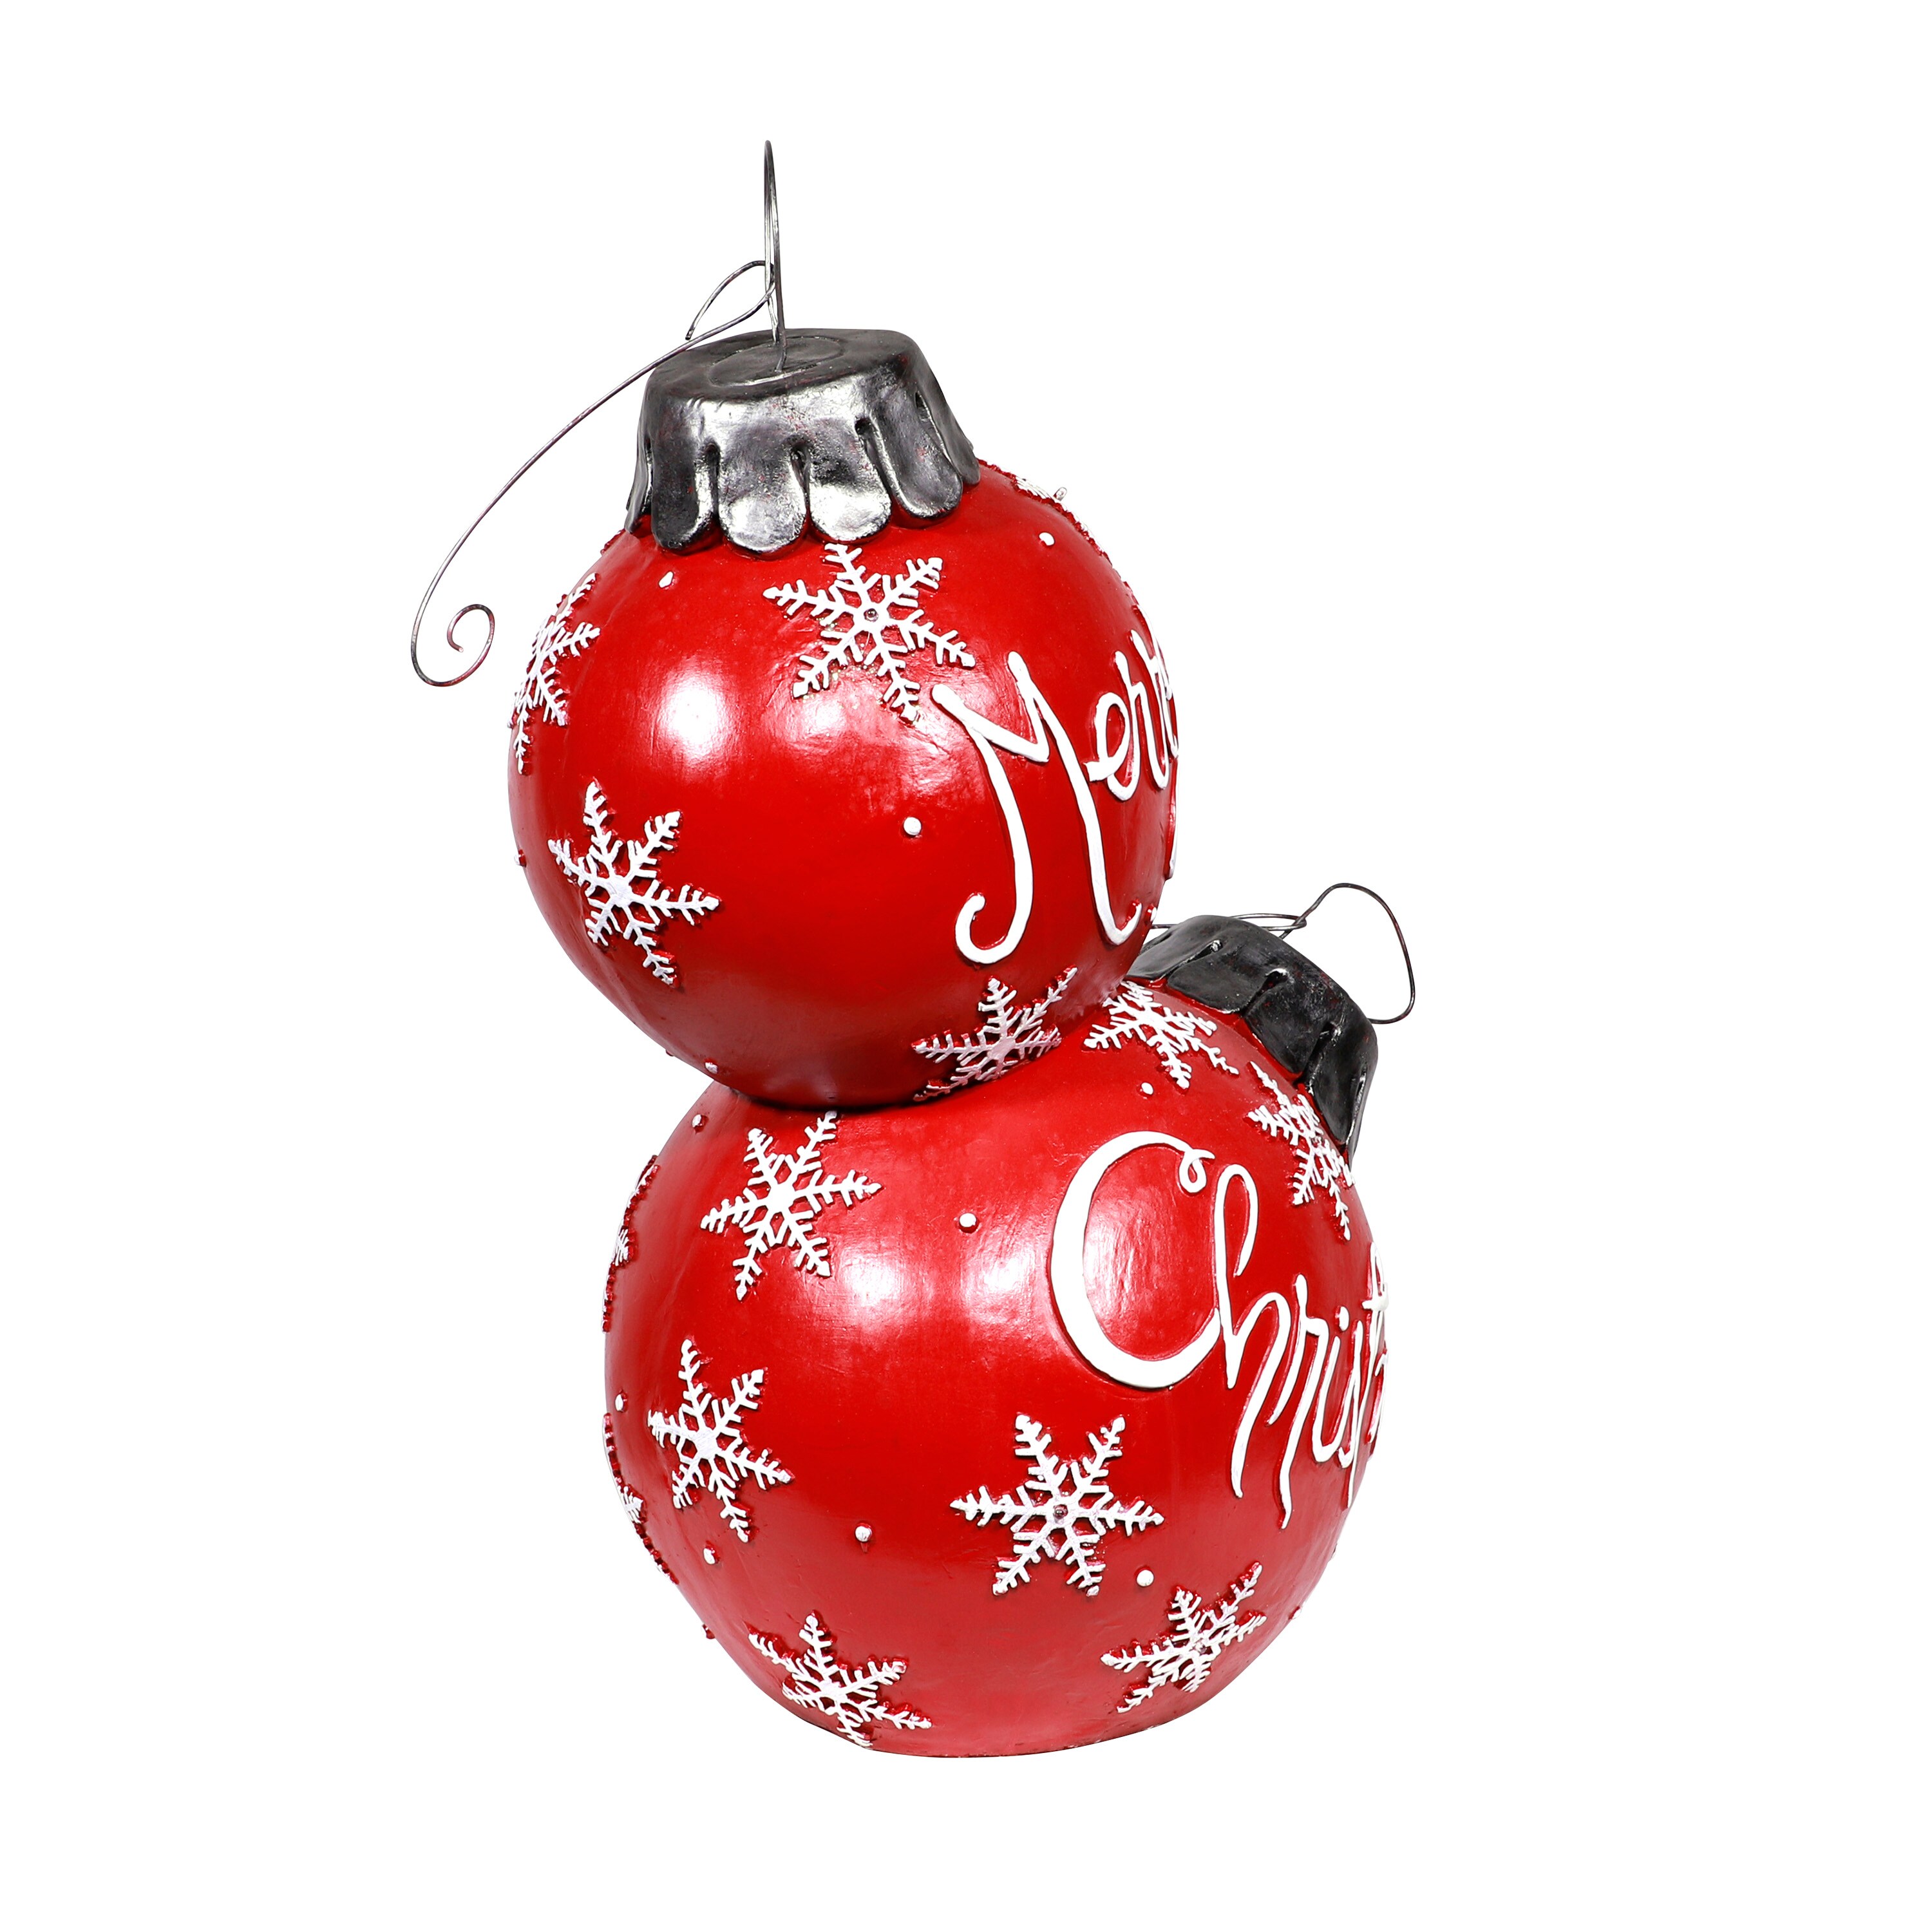 Merry Christmas Travel Storage Handled Container Treats Ornaments